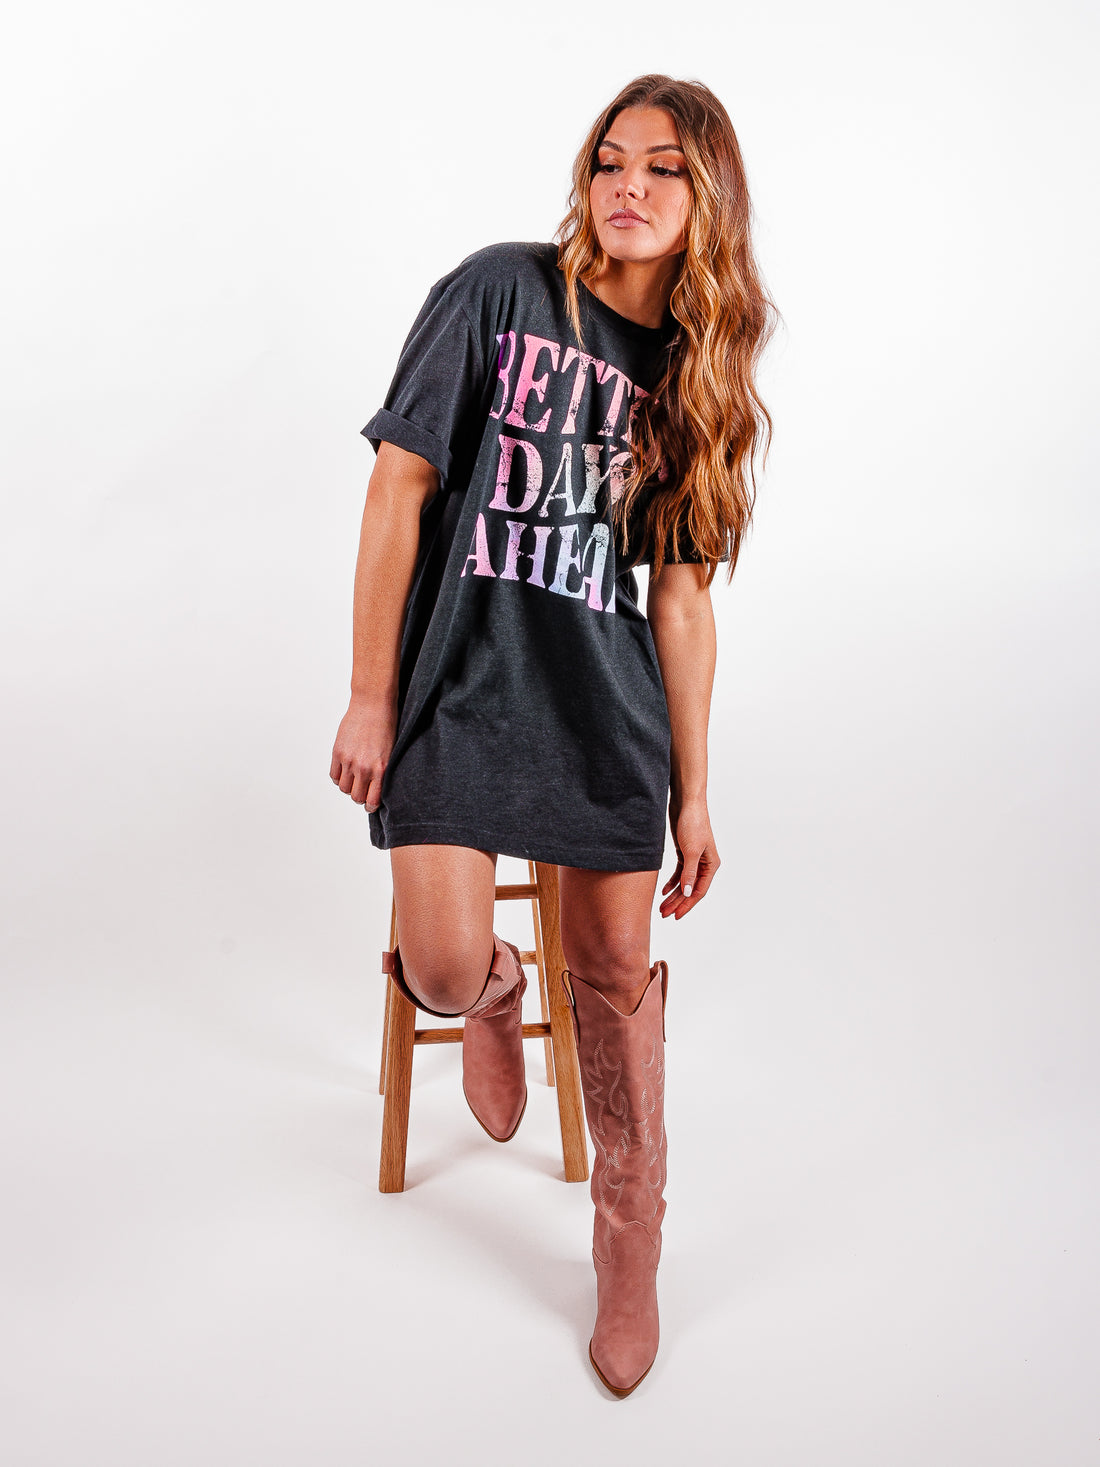 Better Days Ahead Oversized Graphic Tee